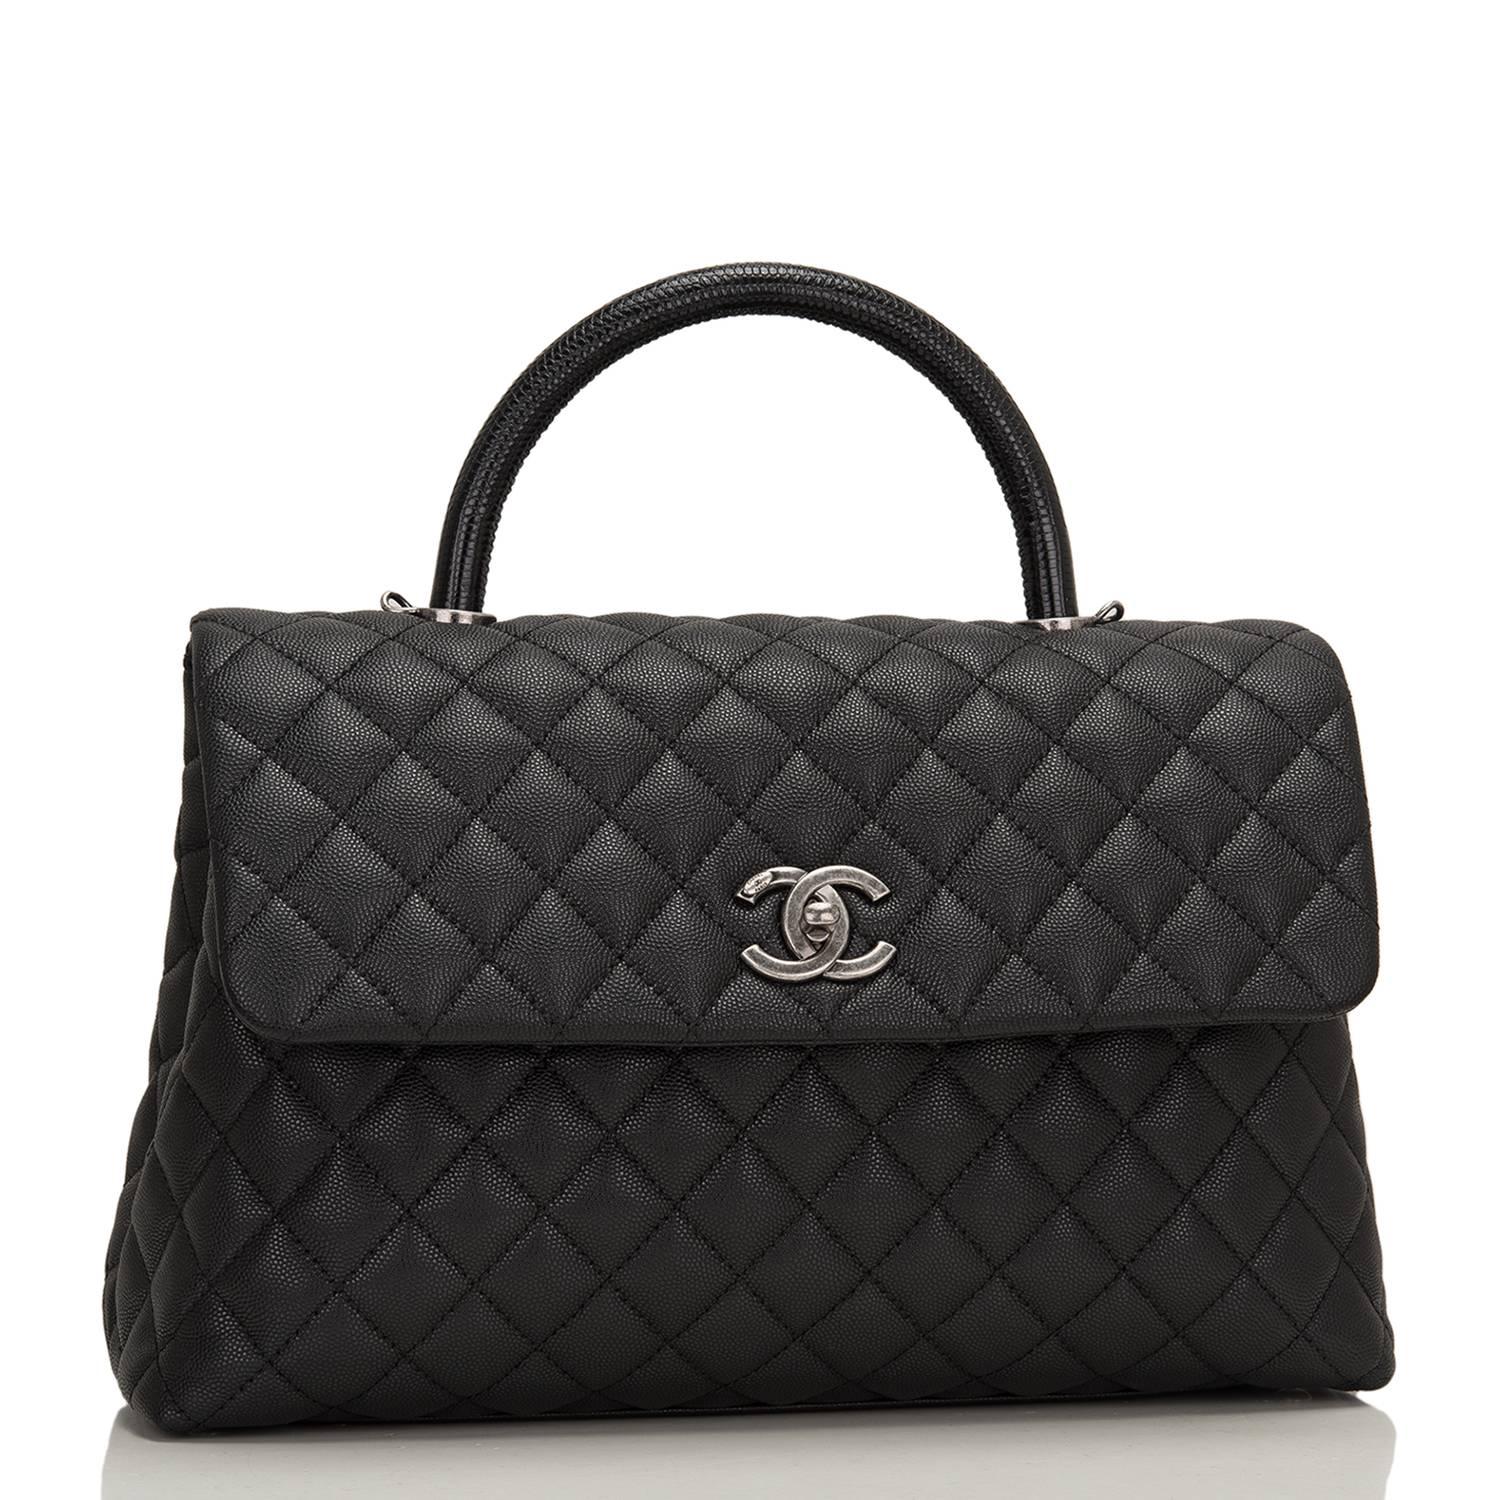 Chanel large Coco handle flap bag of black calfskin leather and lizard handle with ruthenium hardware.

This rare bag has the signature diamond quilting in a trapezoidal shape with signature CC interlocking closure, lizard top handle, and long